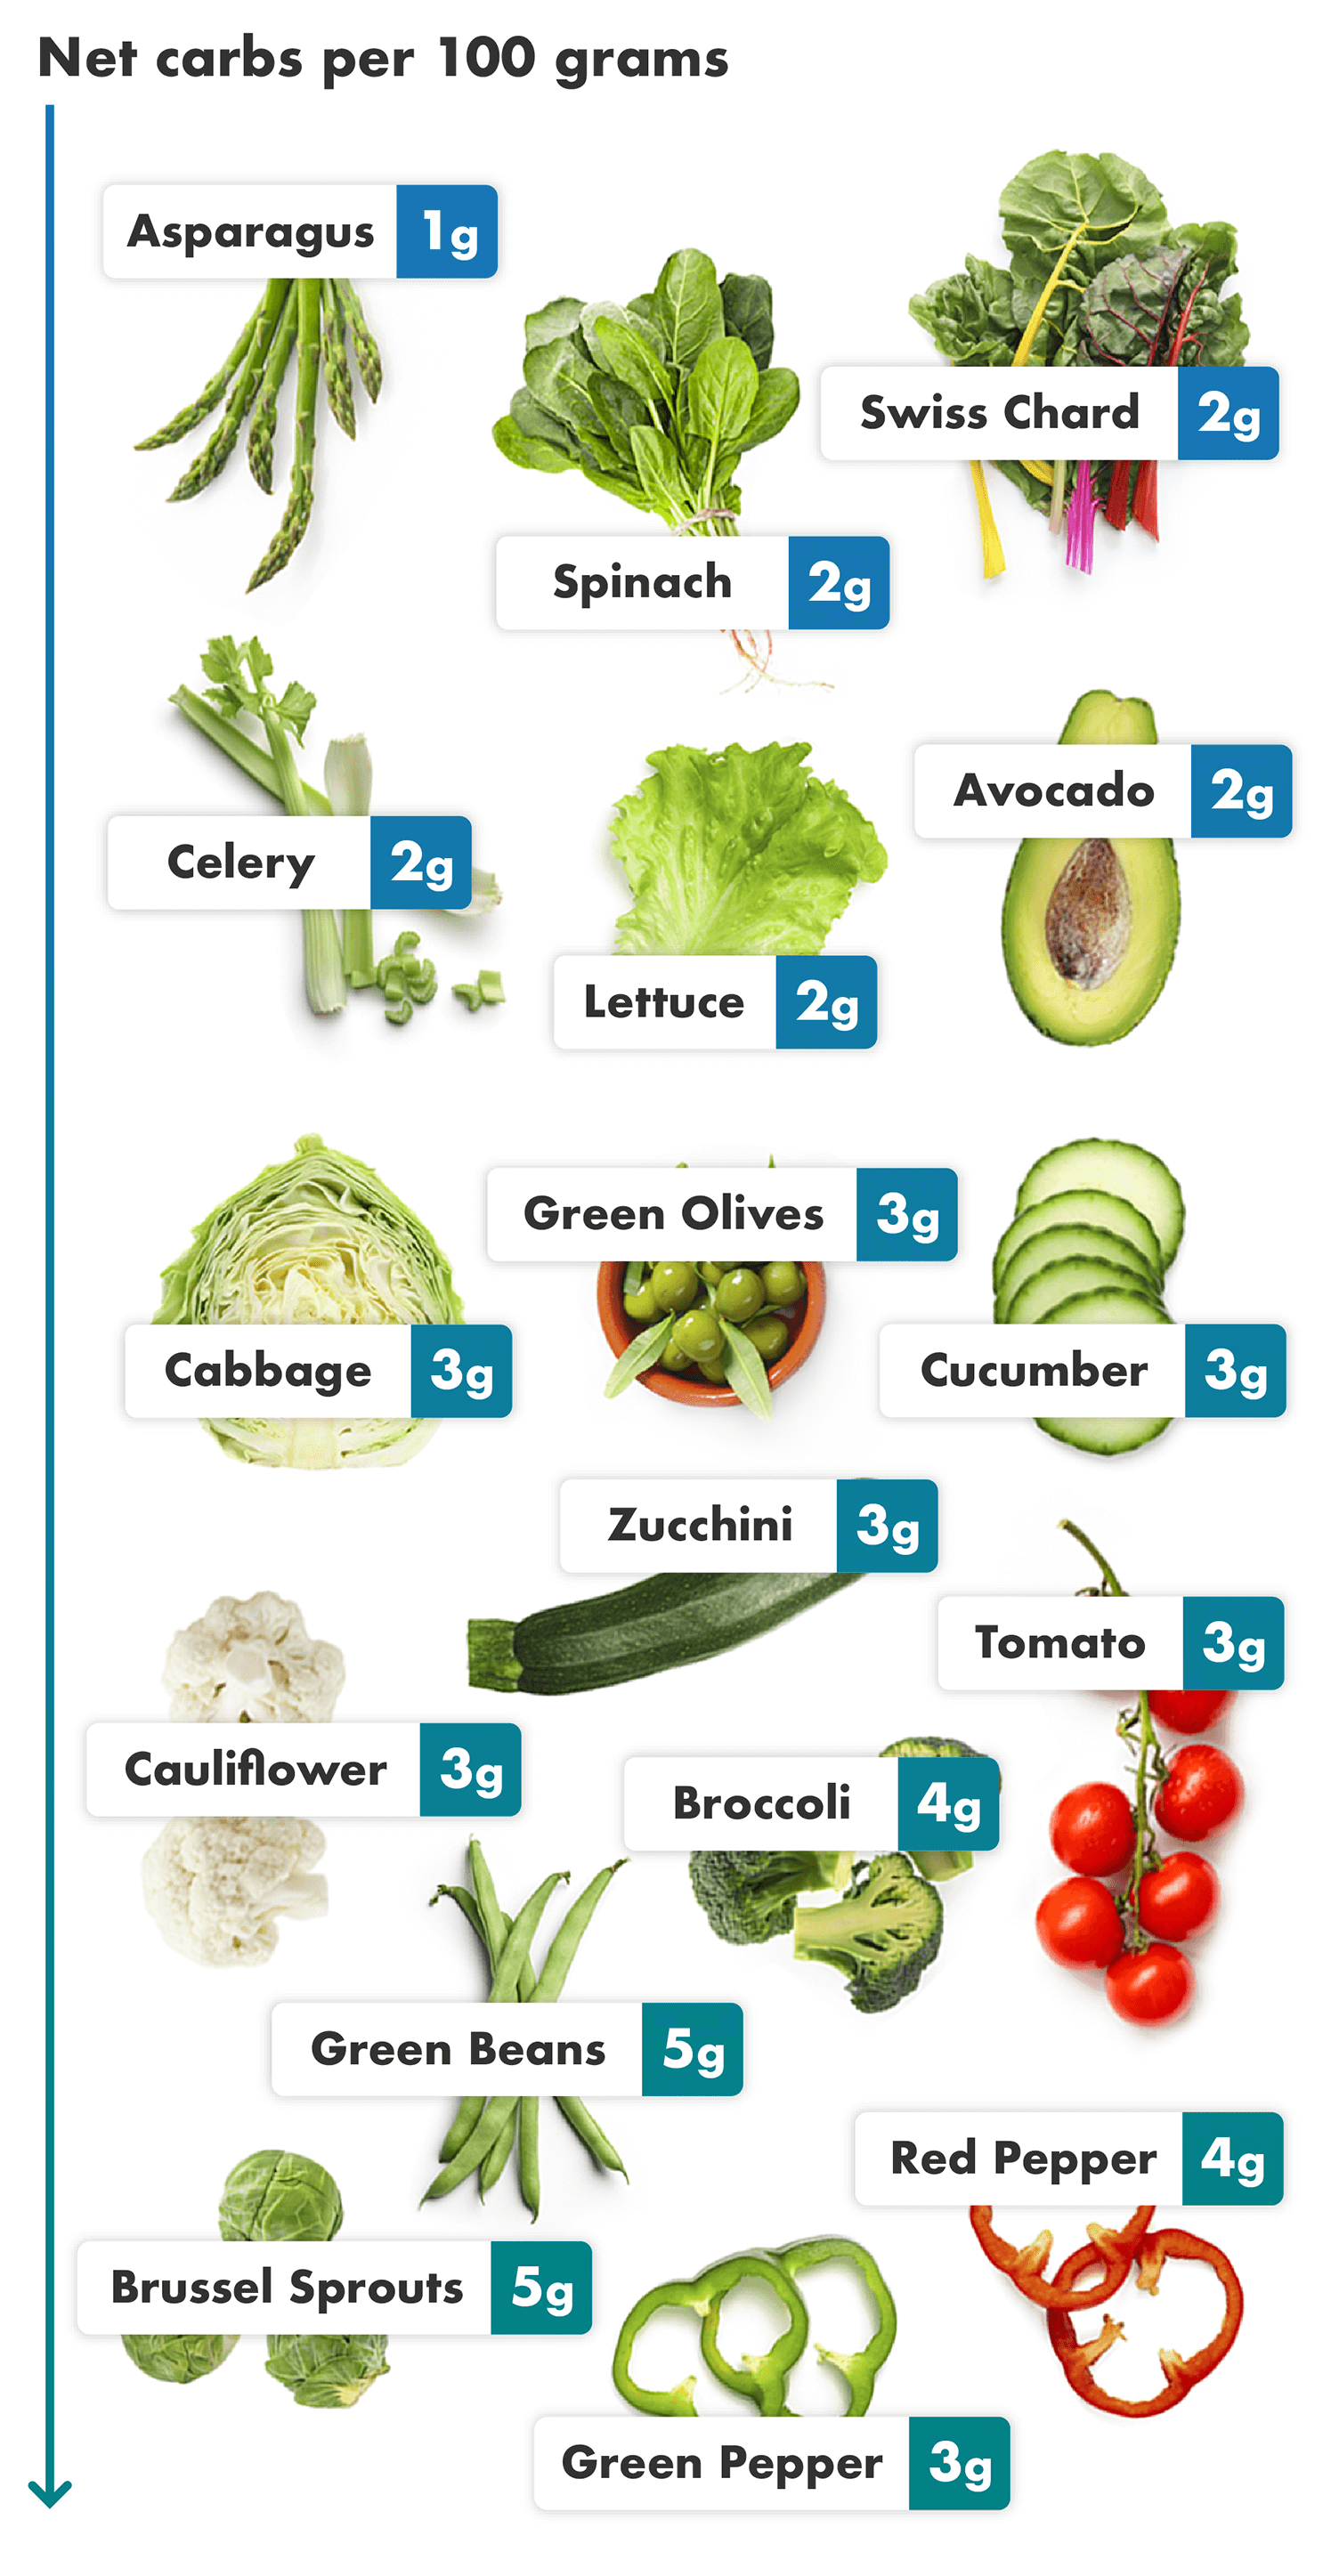 Layout of photos of the best keto vegetables with their net carb count overlaid. They are arranged in order of the least to most net carbs per 100 grams serving, starting with the vegetables with the least amount of carbs on the left.